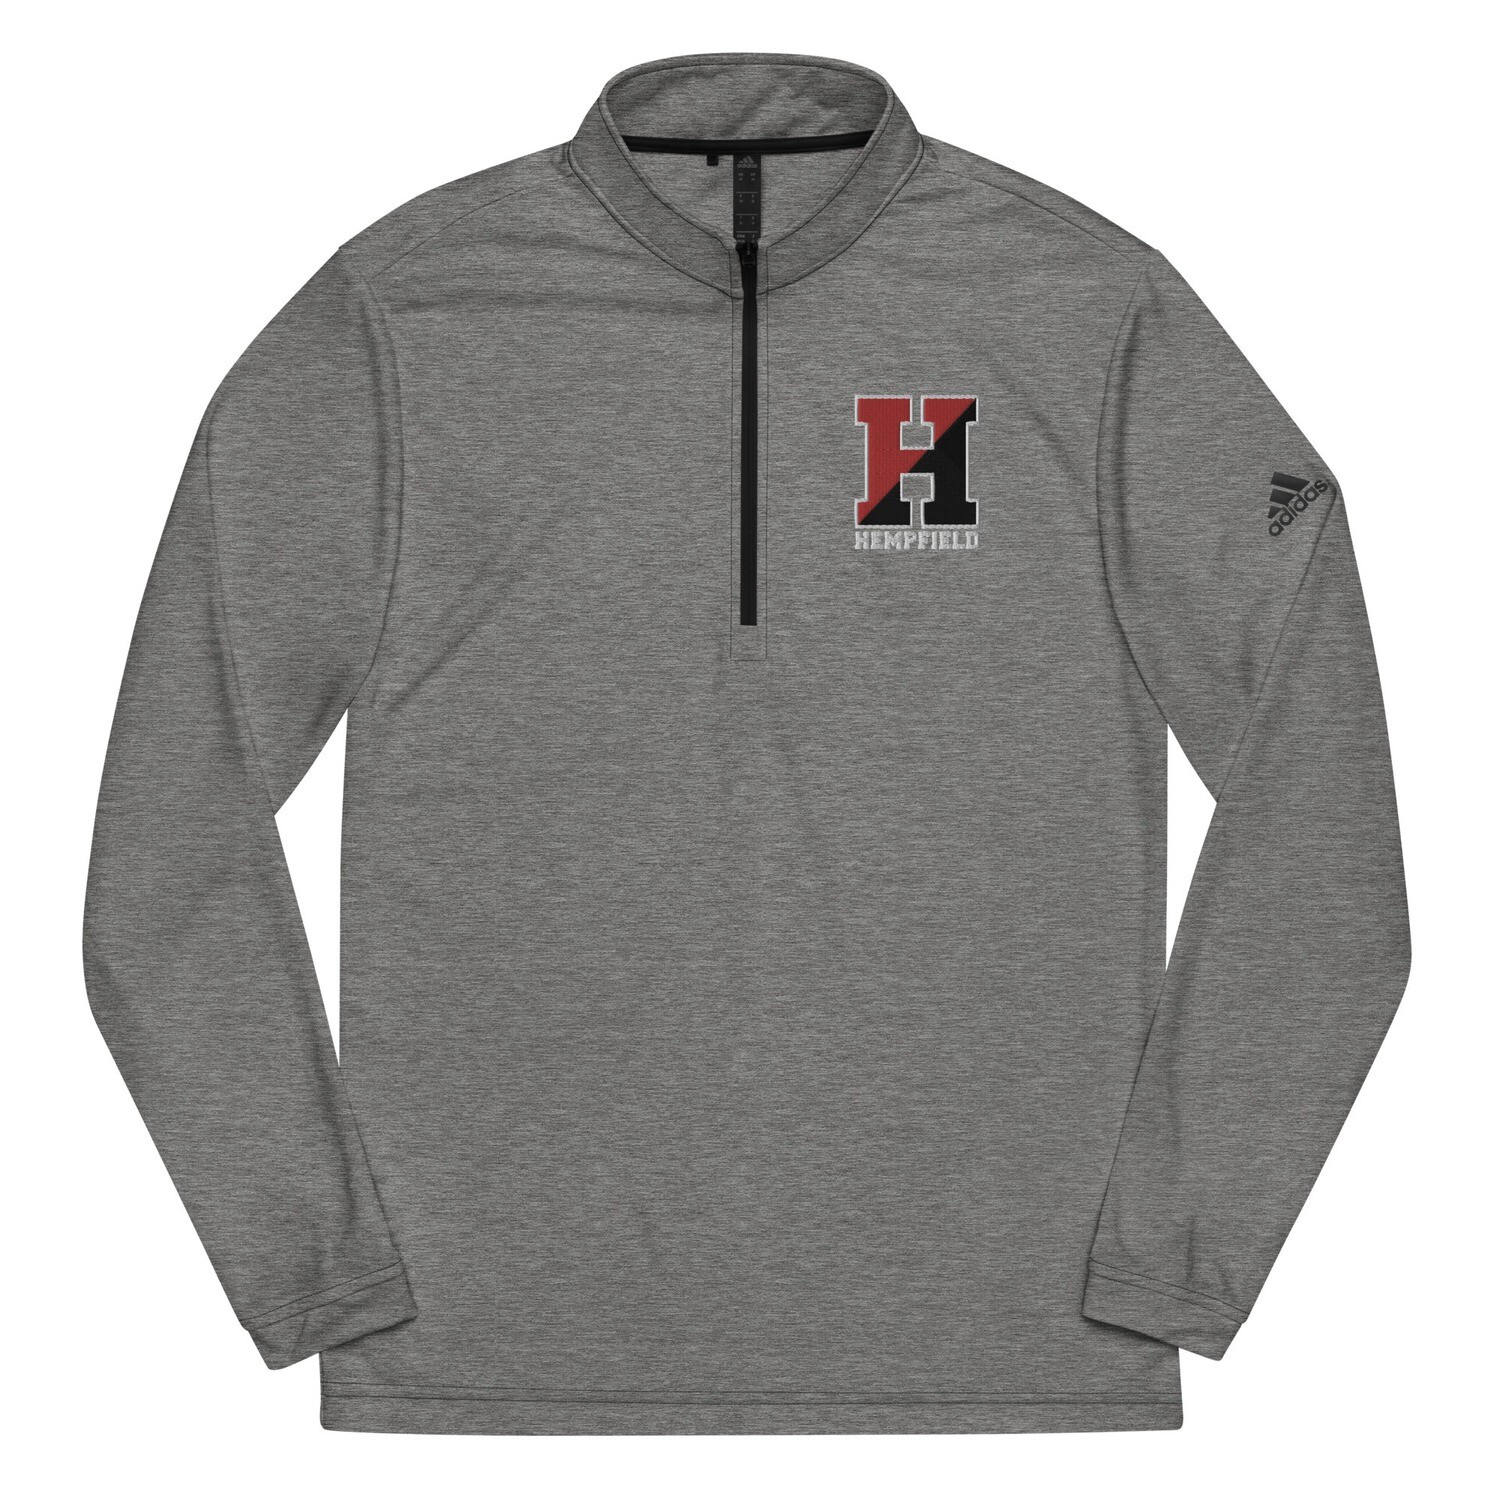 Hempfield "the H" Embroidered Adidas Quarter zip pullover